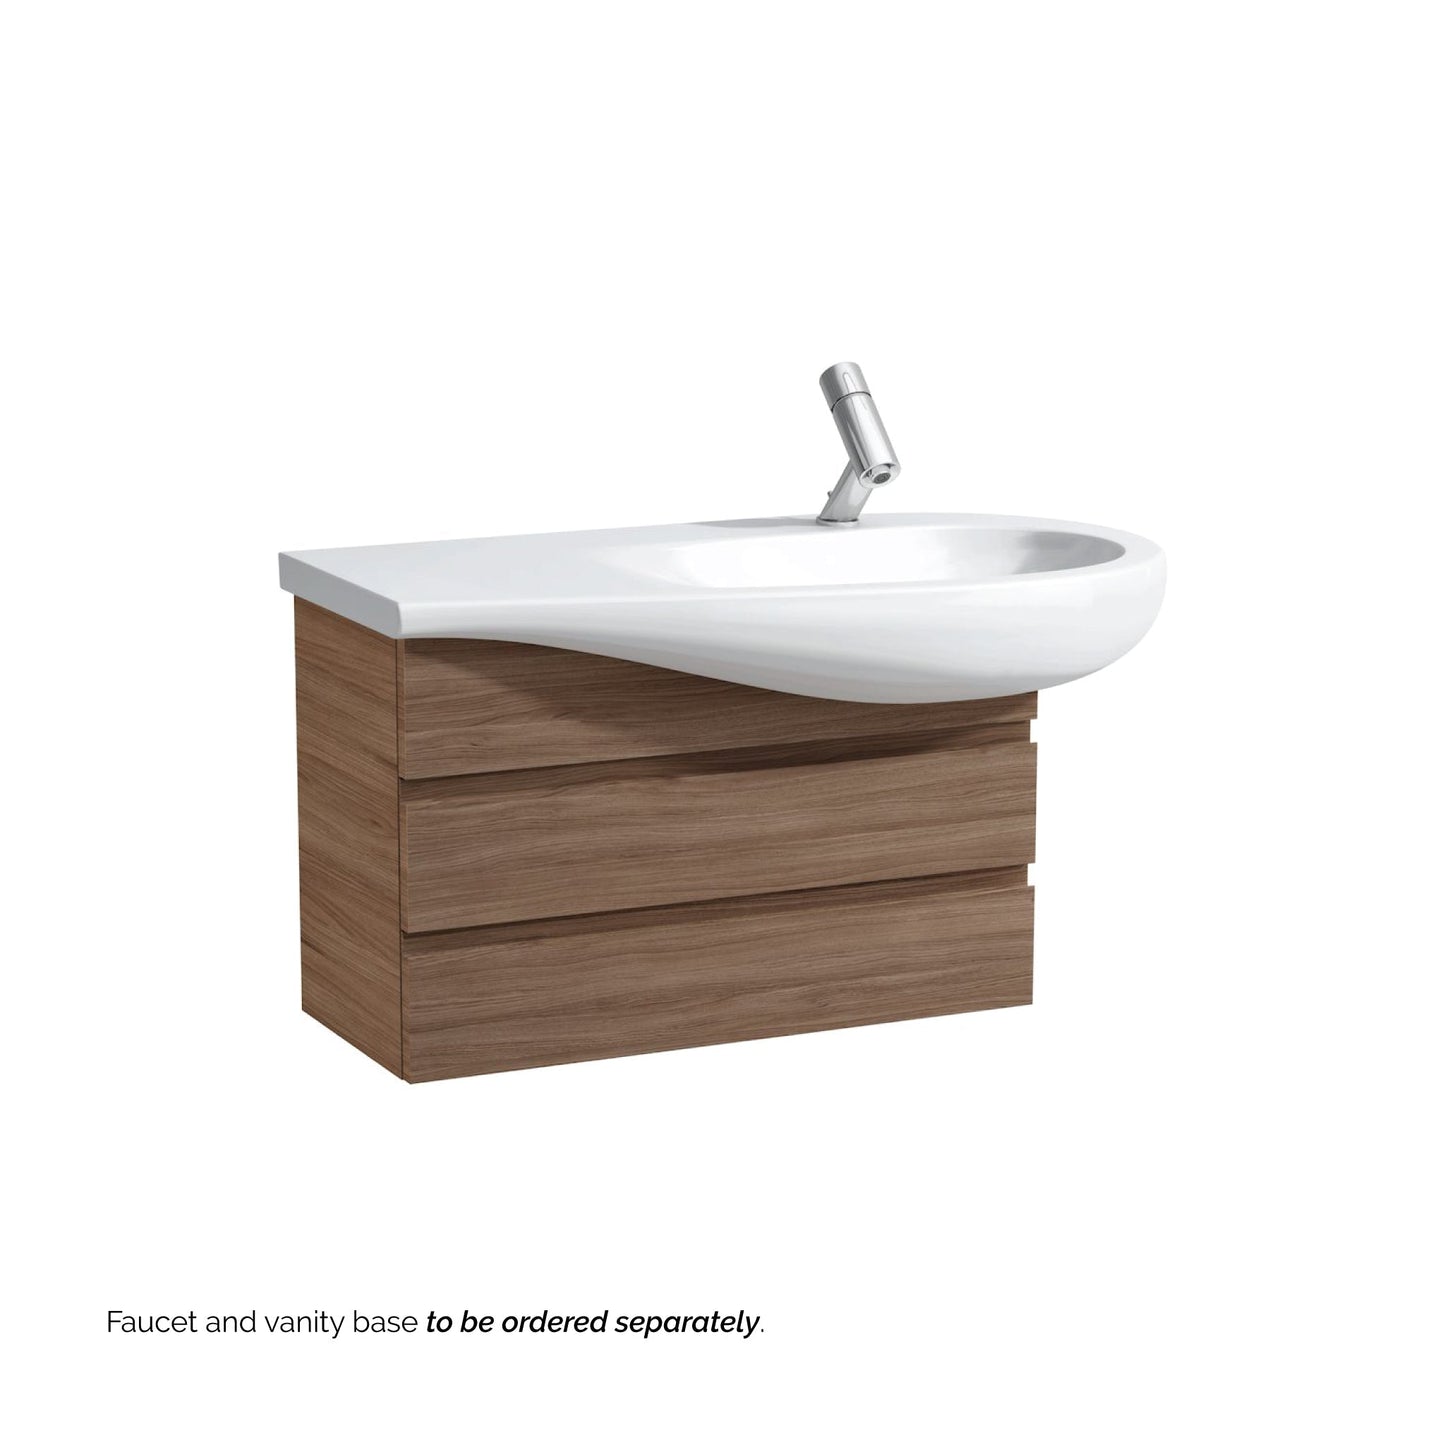 Laufen IlBagnoAlessi 35" x 20" White Wall-Mounted Shelf-Left Bathroom Sink With Faucet Hole